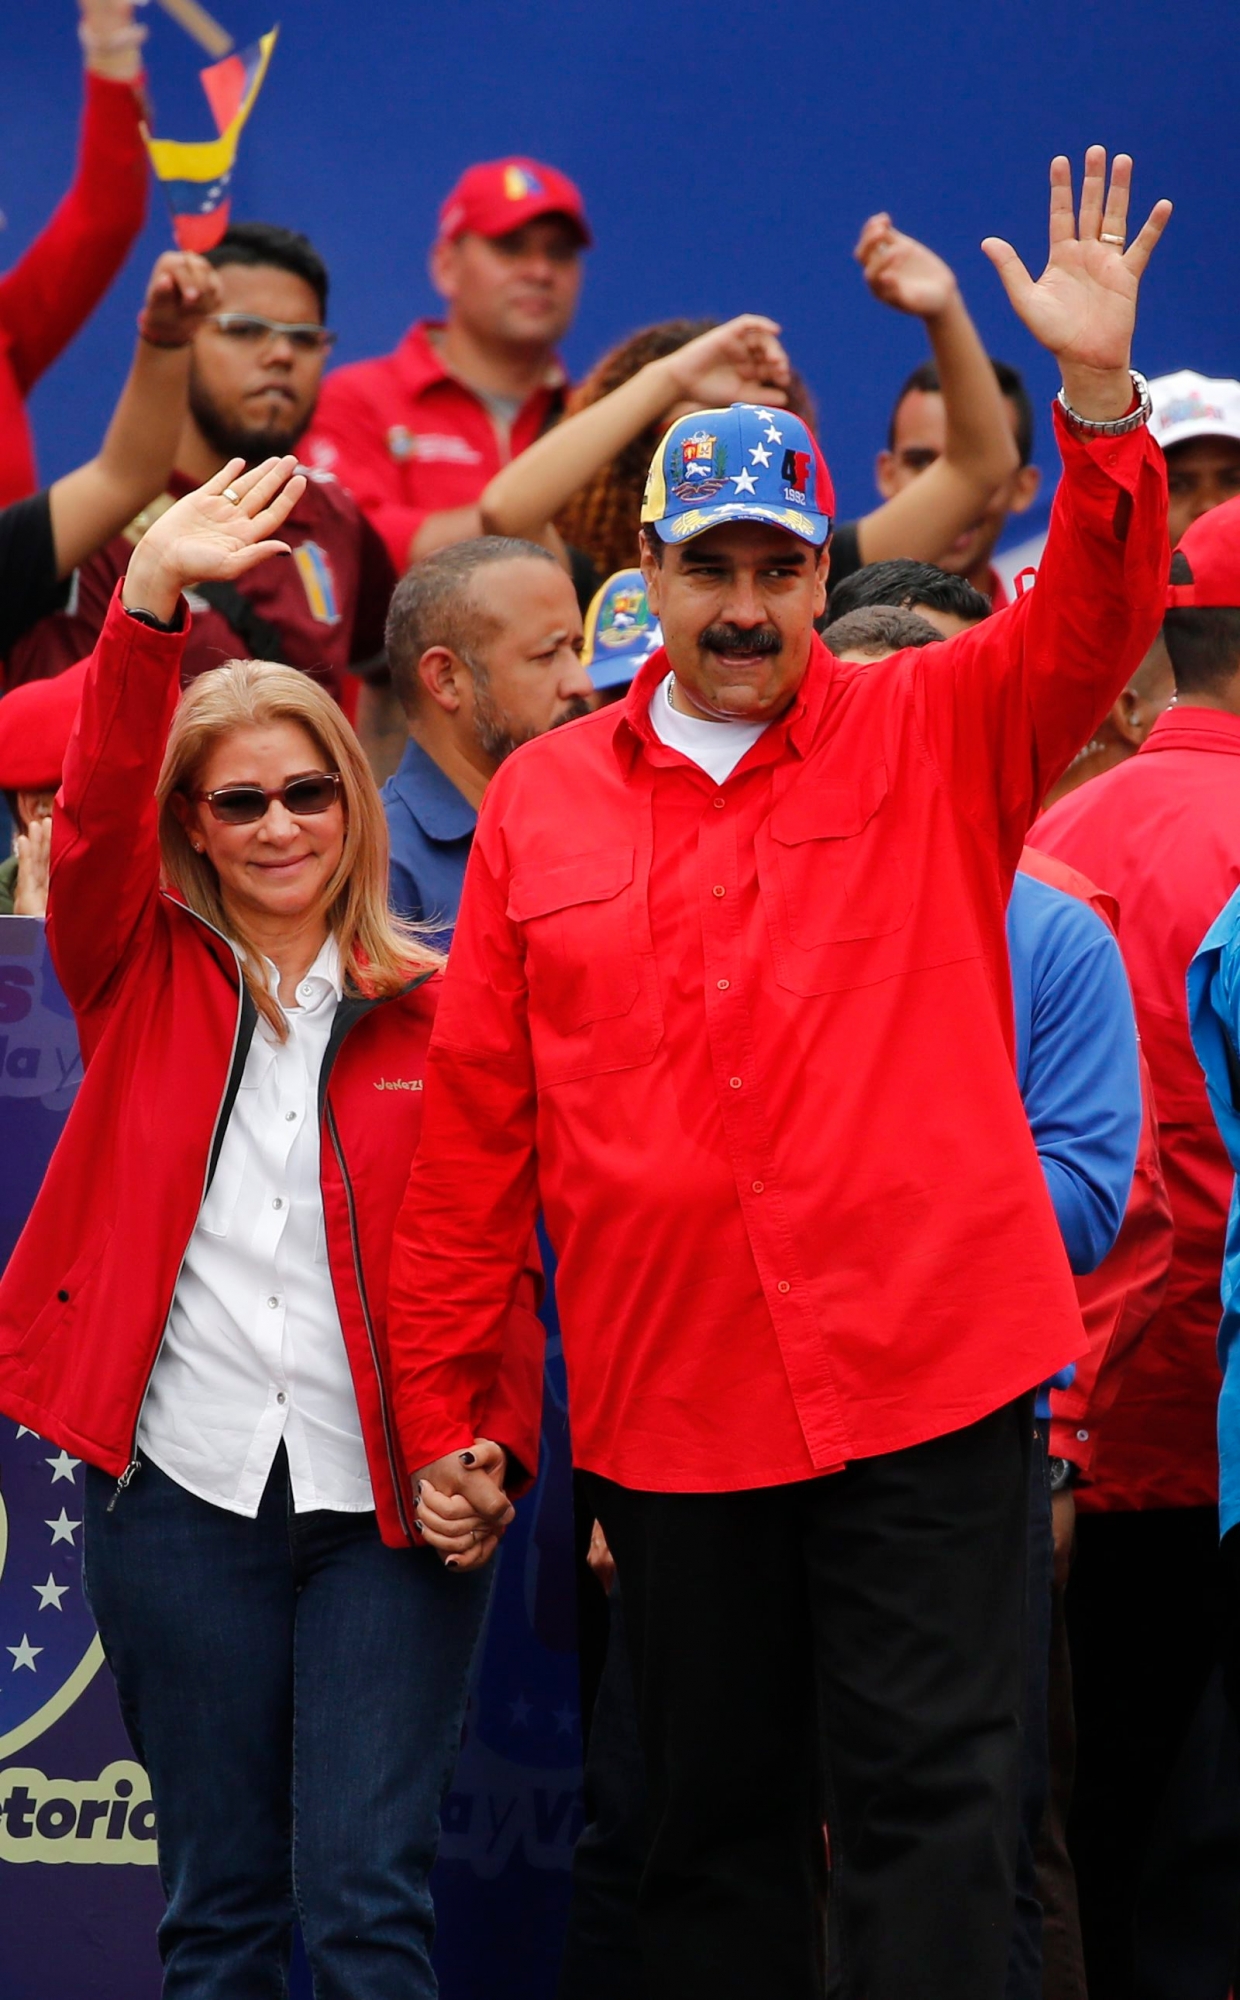 Venezuela's President Nicolas Maduro and first lady Cilia Flores acknowledge supporters at the end of a rally in Caracas, Venezuela, Saturday, Feb. 2, 2019. Maduro called the rally to celebrate the 20th anniversary of the late President Hugo Chavez's rise to power. (AP Photo/Ariana Cubillos) Venezuela Political Crisis